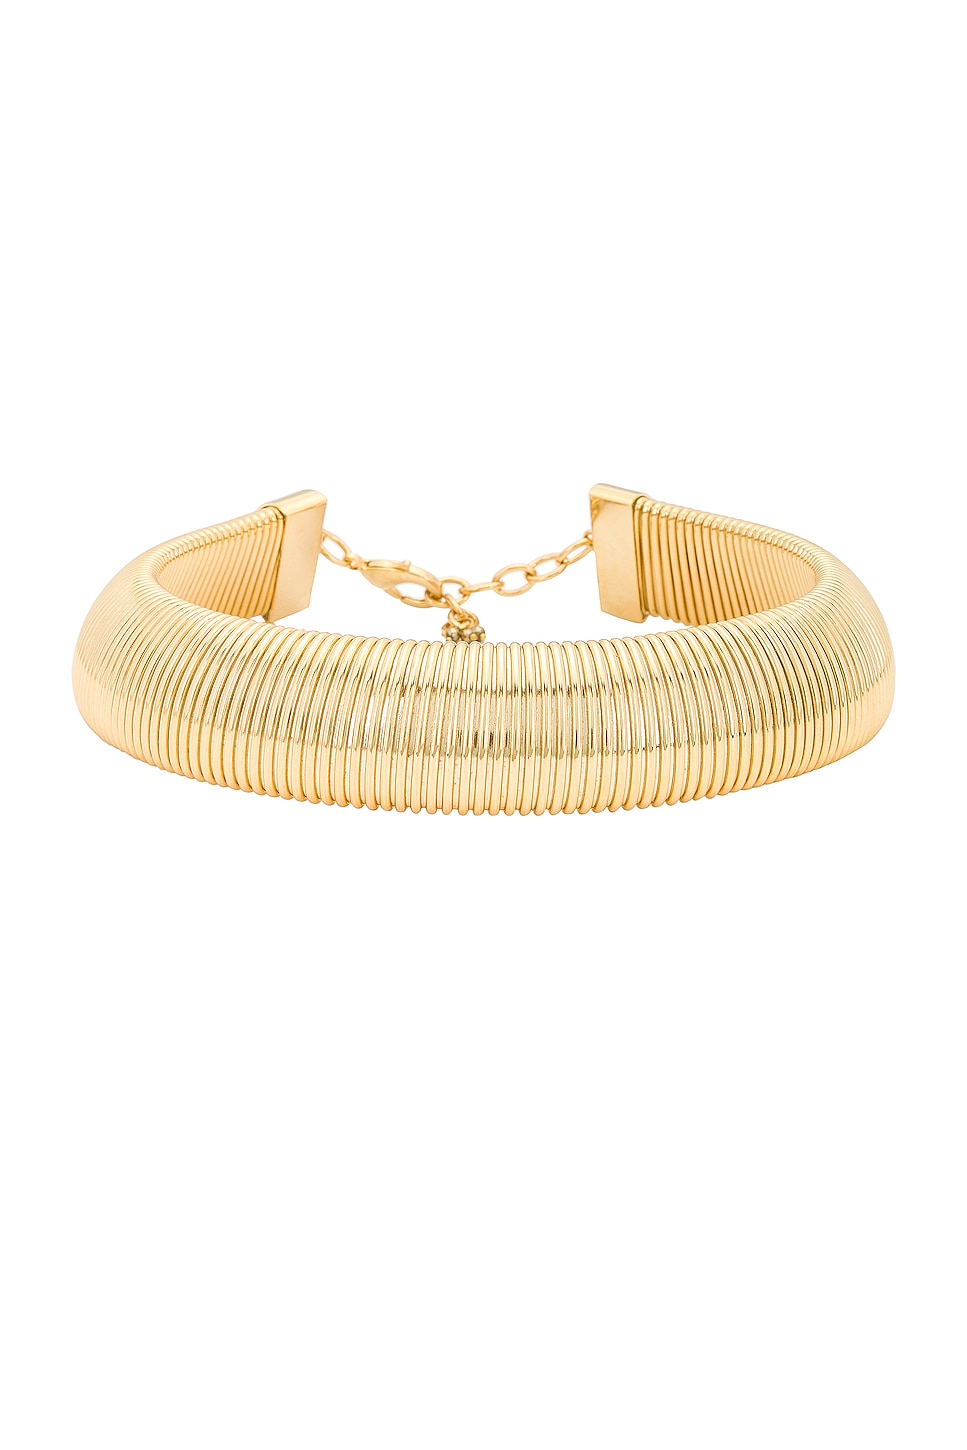 Image 1 of Rosantica Elettra Choker Necklace in Gold